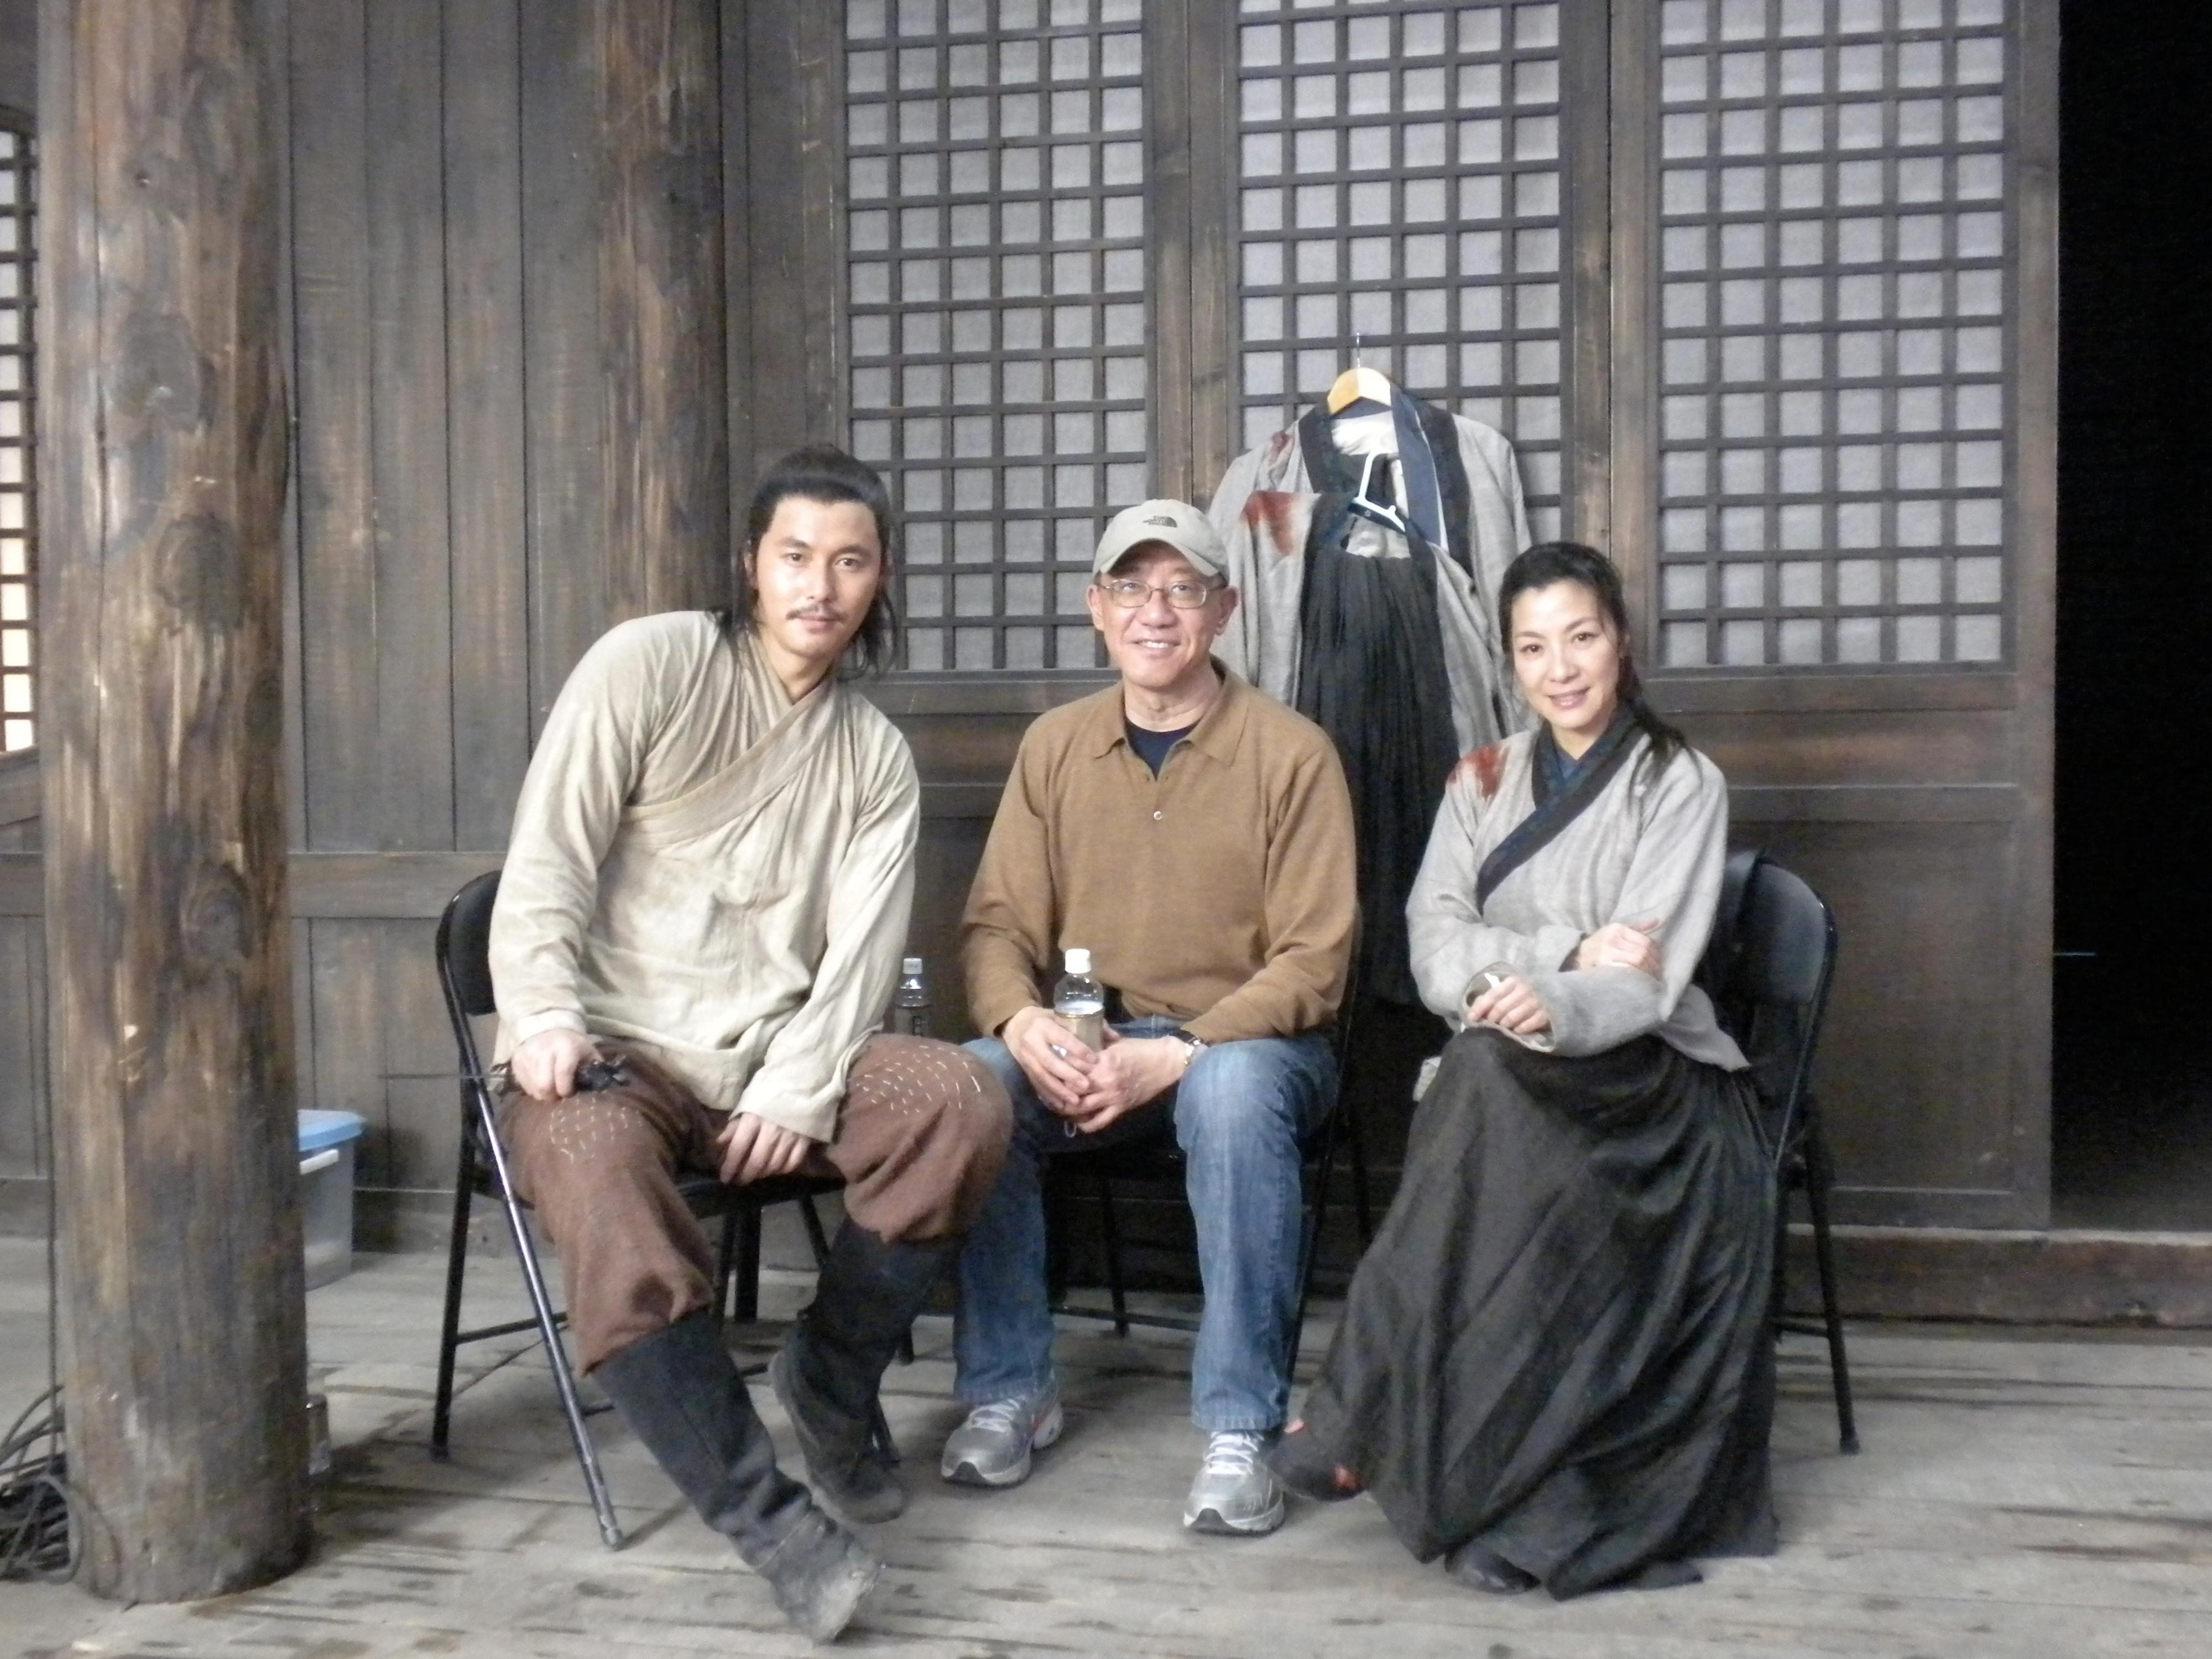 The Hong Kong Film Archive (HKFA) of the Leisure and Cultural Services Department will launch its latest "Movie Talk" series in January next year by screening four films produced by internationally renowned film producer Terence Chang at the HKFA Cinema. Photo shows Terence Chang (centre) with actress Michelle Yeoh (right) and actor Jung Woo-sung (left) on the set of "Reign of Assassins" (2010). 